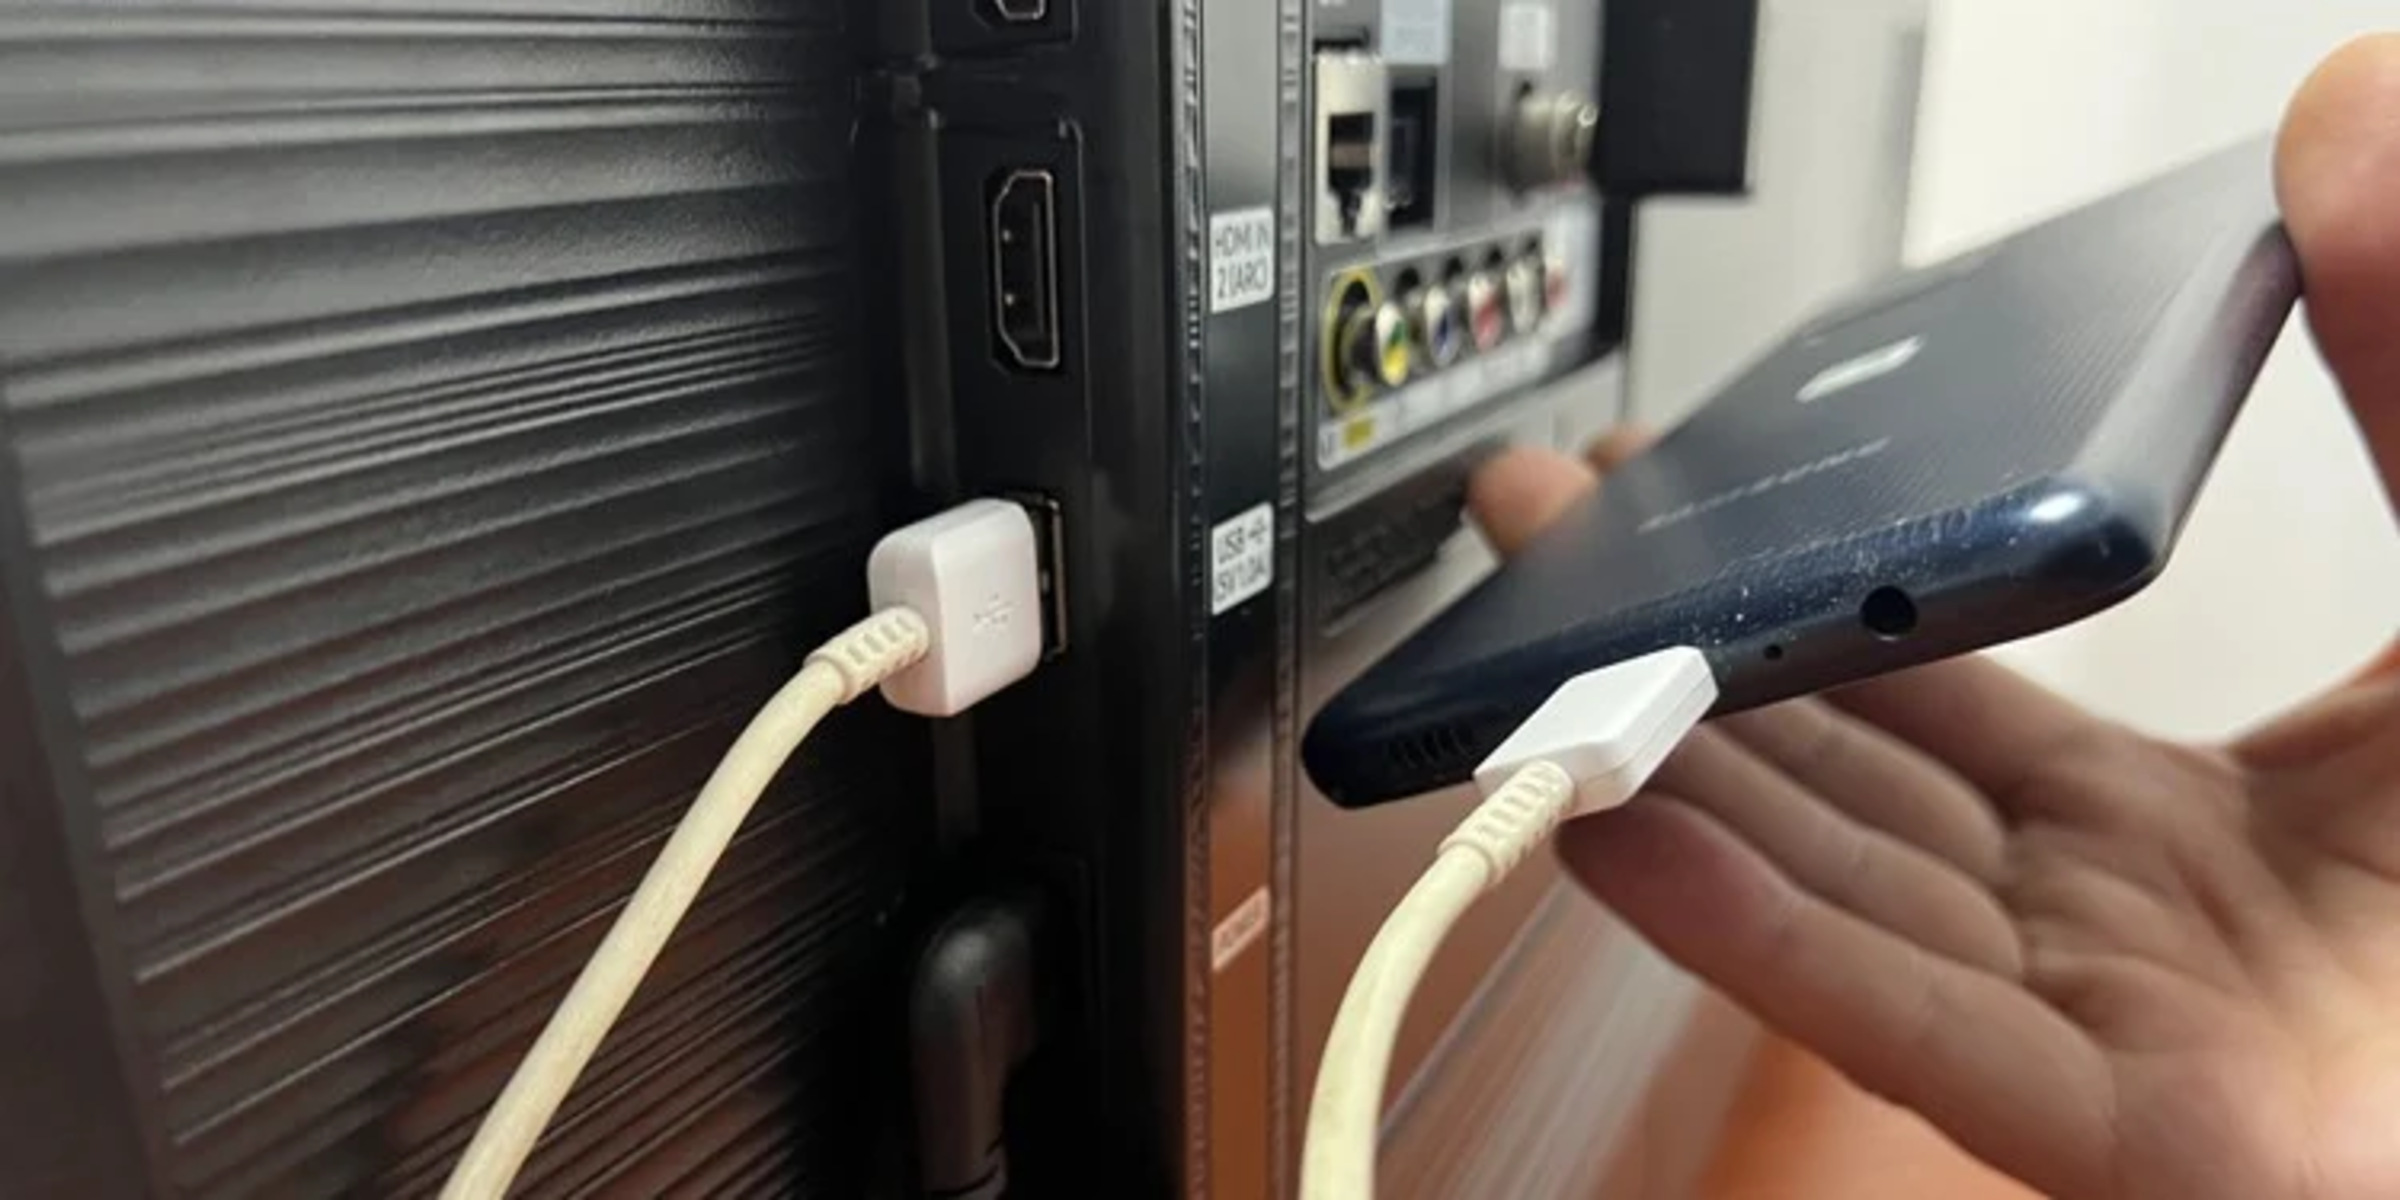 How To Connect Phone To TV With USB (Without HDMI)